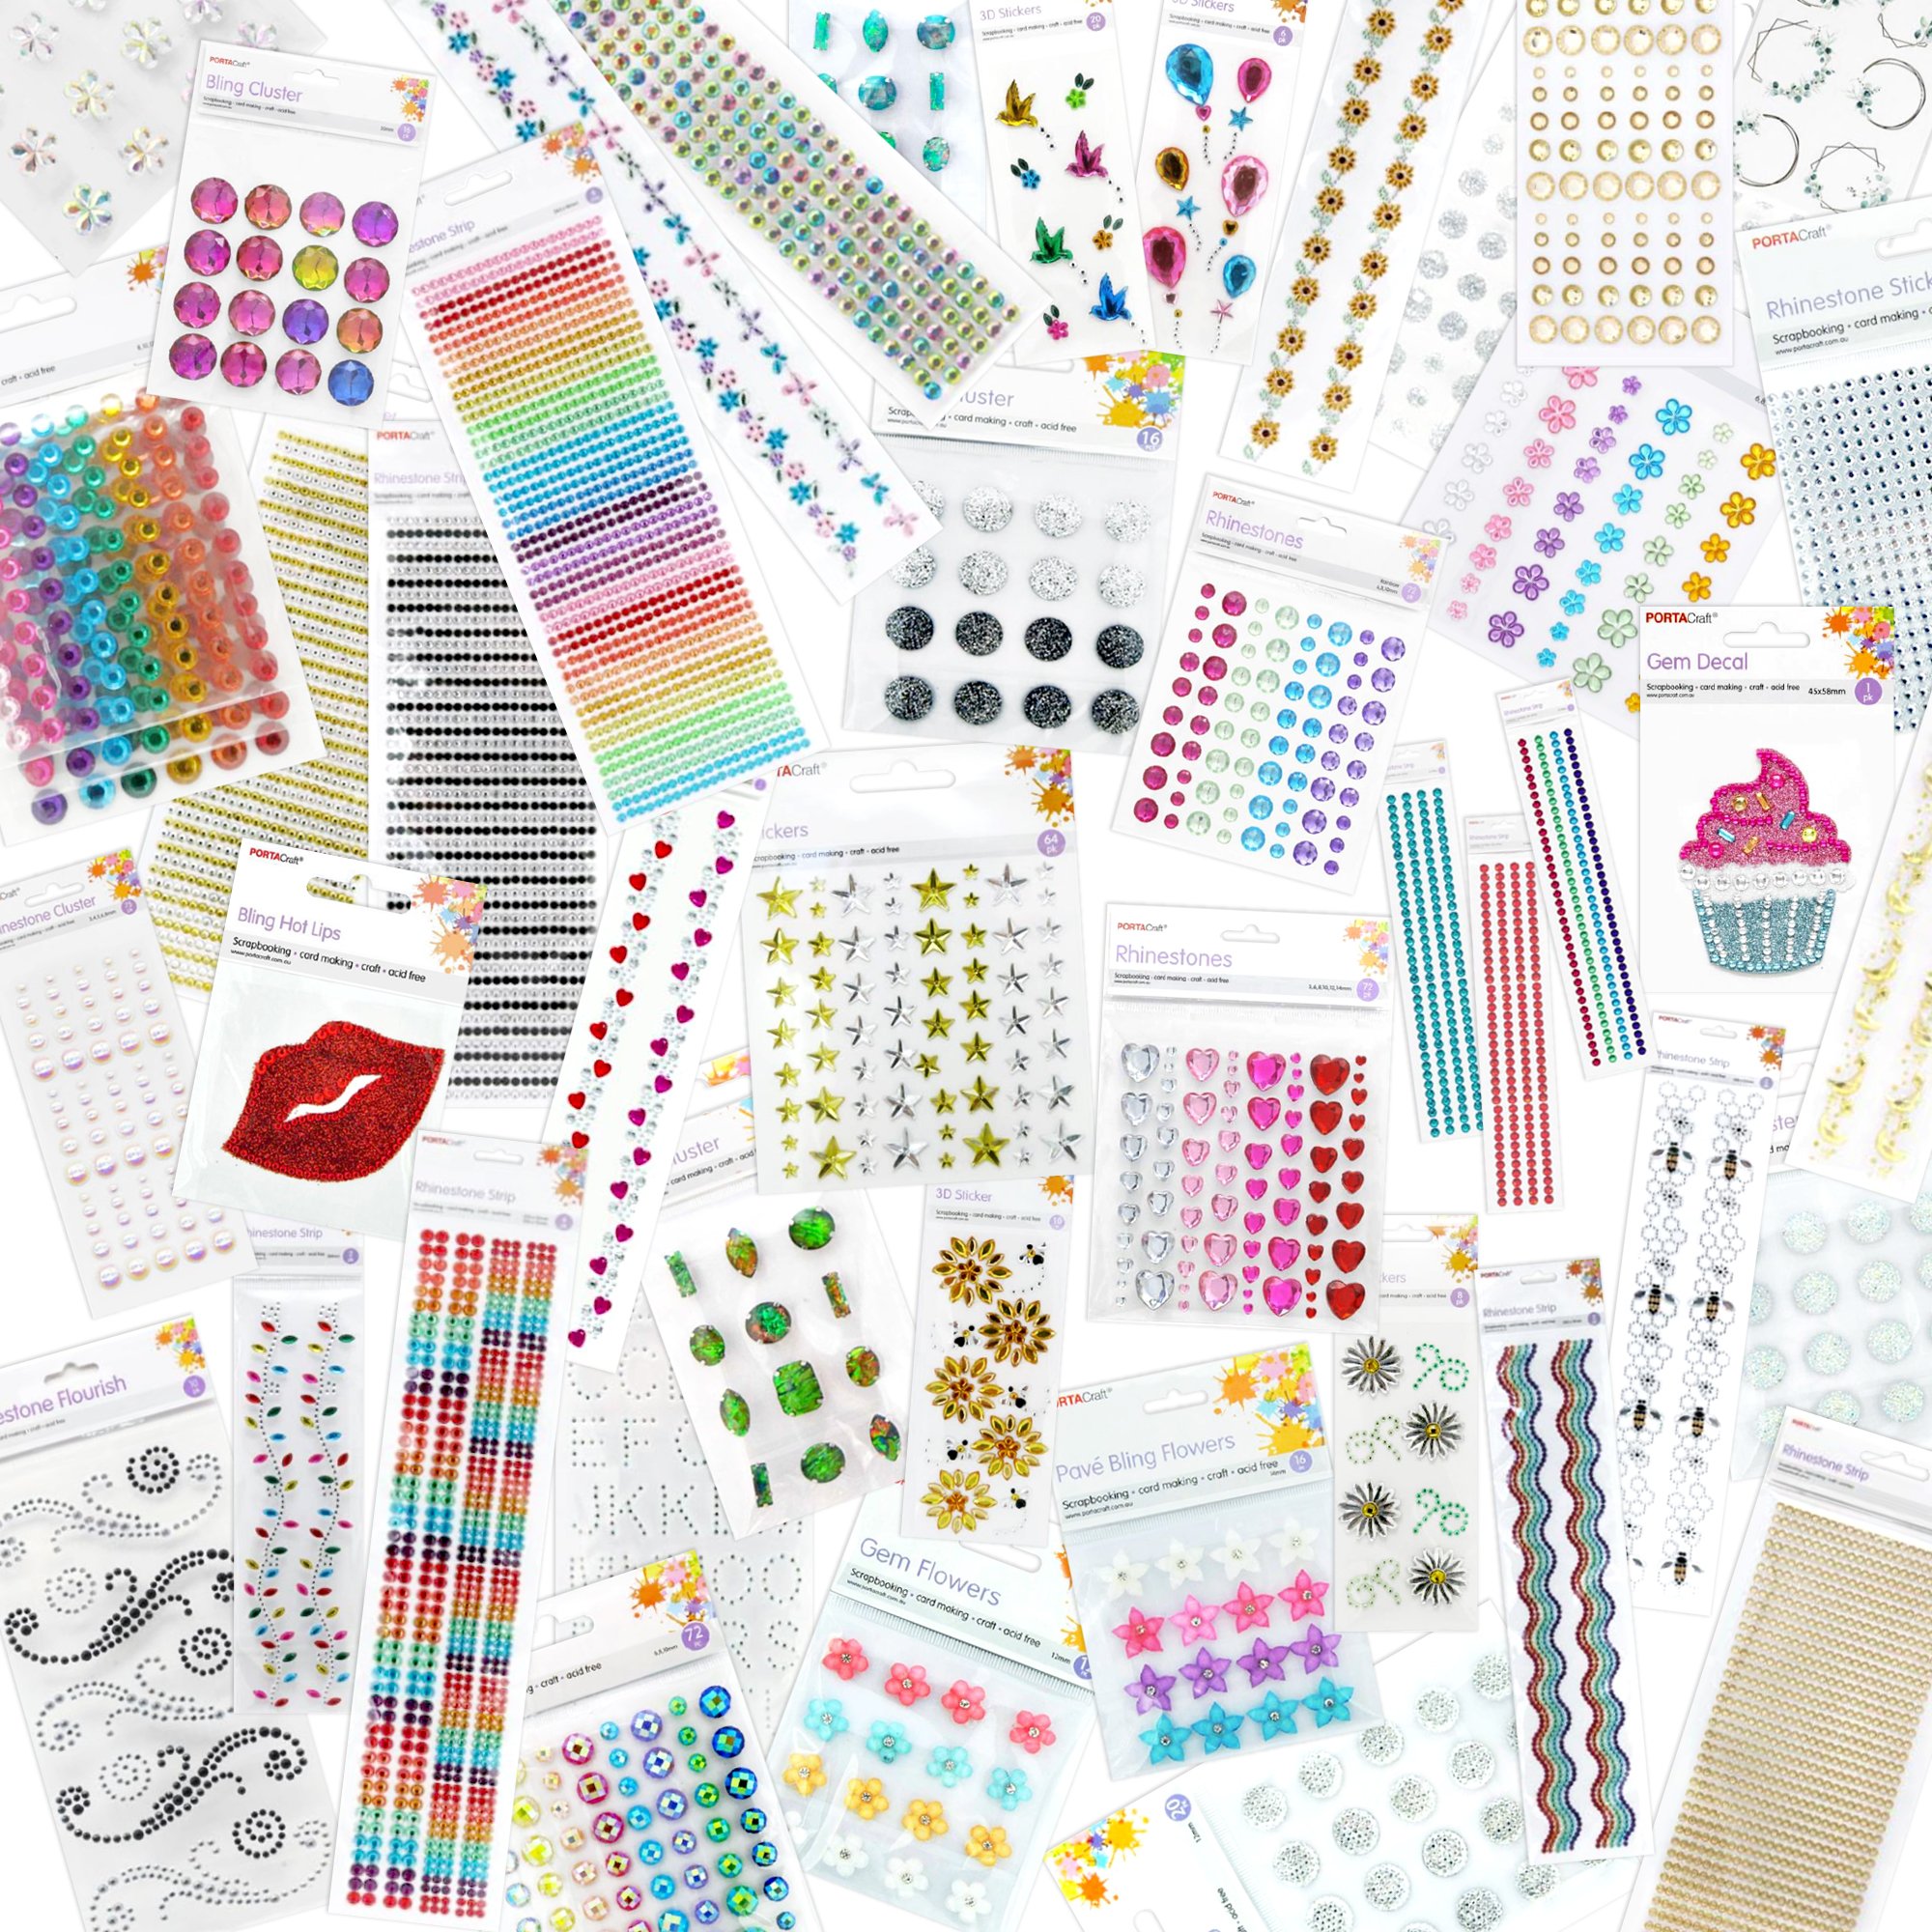 For full on glam or just a bit of sparkle we have a huge range of bling to jazz up any craft creation🪩✨New stock just arrived

#craft #craftembellishments #gems #gemstones #rhinestones #bling #make #create #stickers #gemstickers #rhinestonestickers 